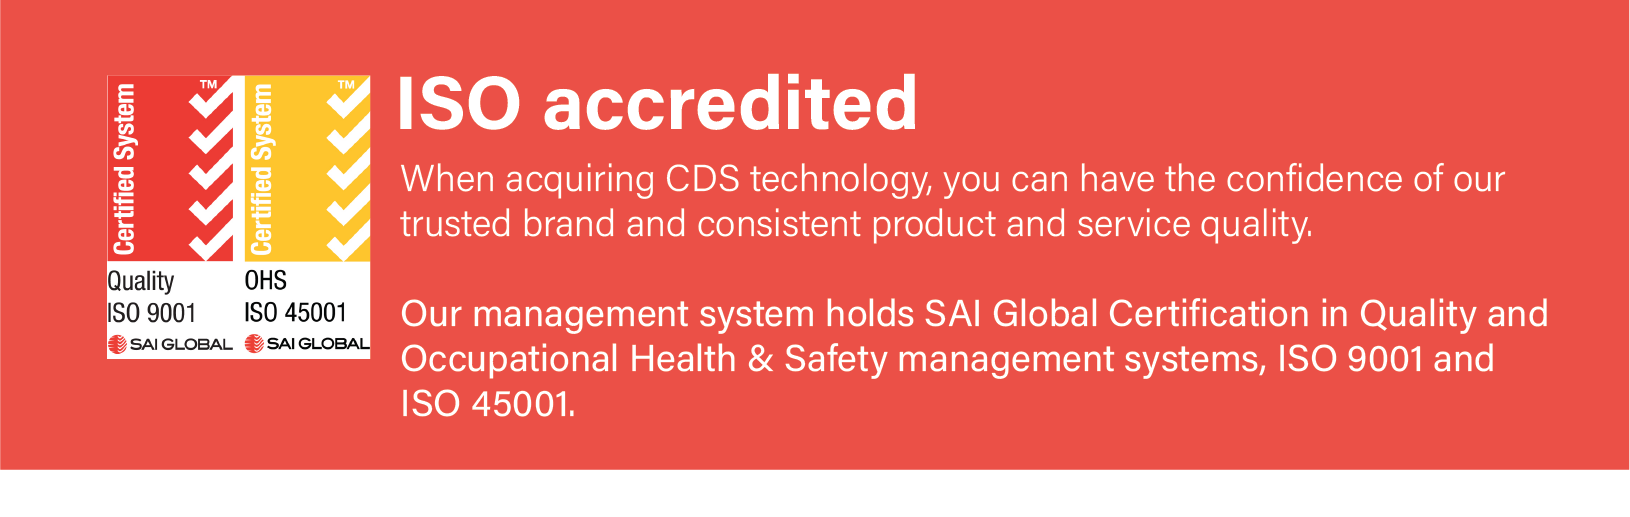 ISO accredited.png